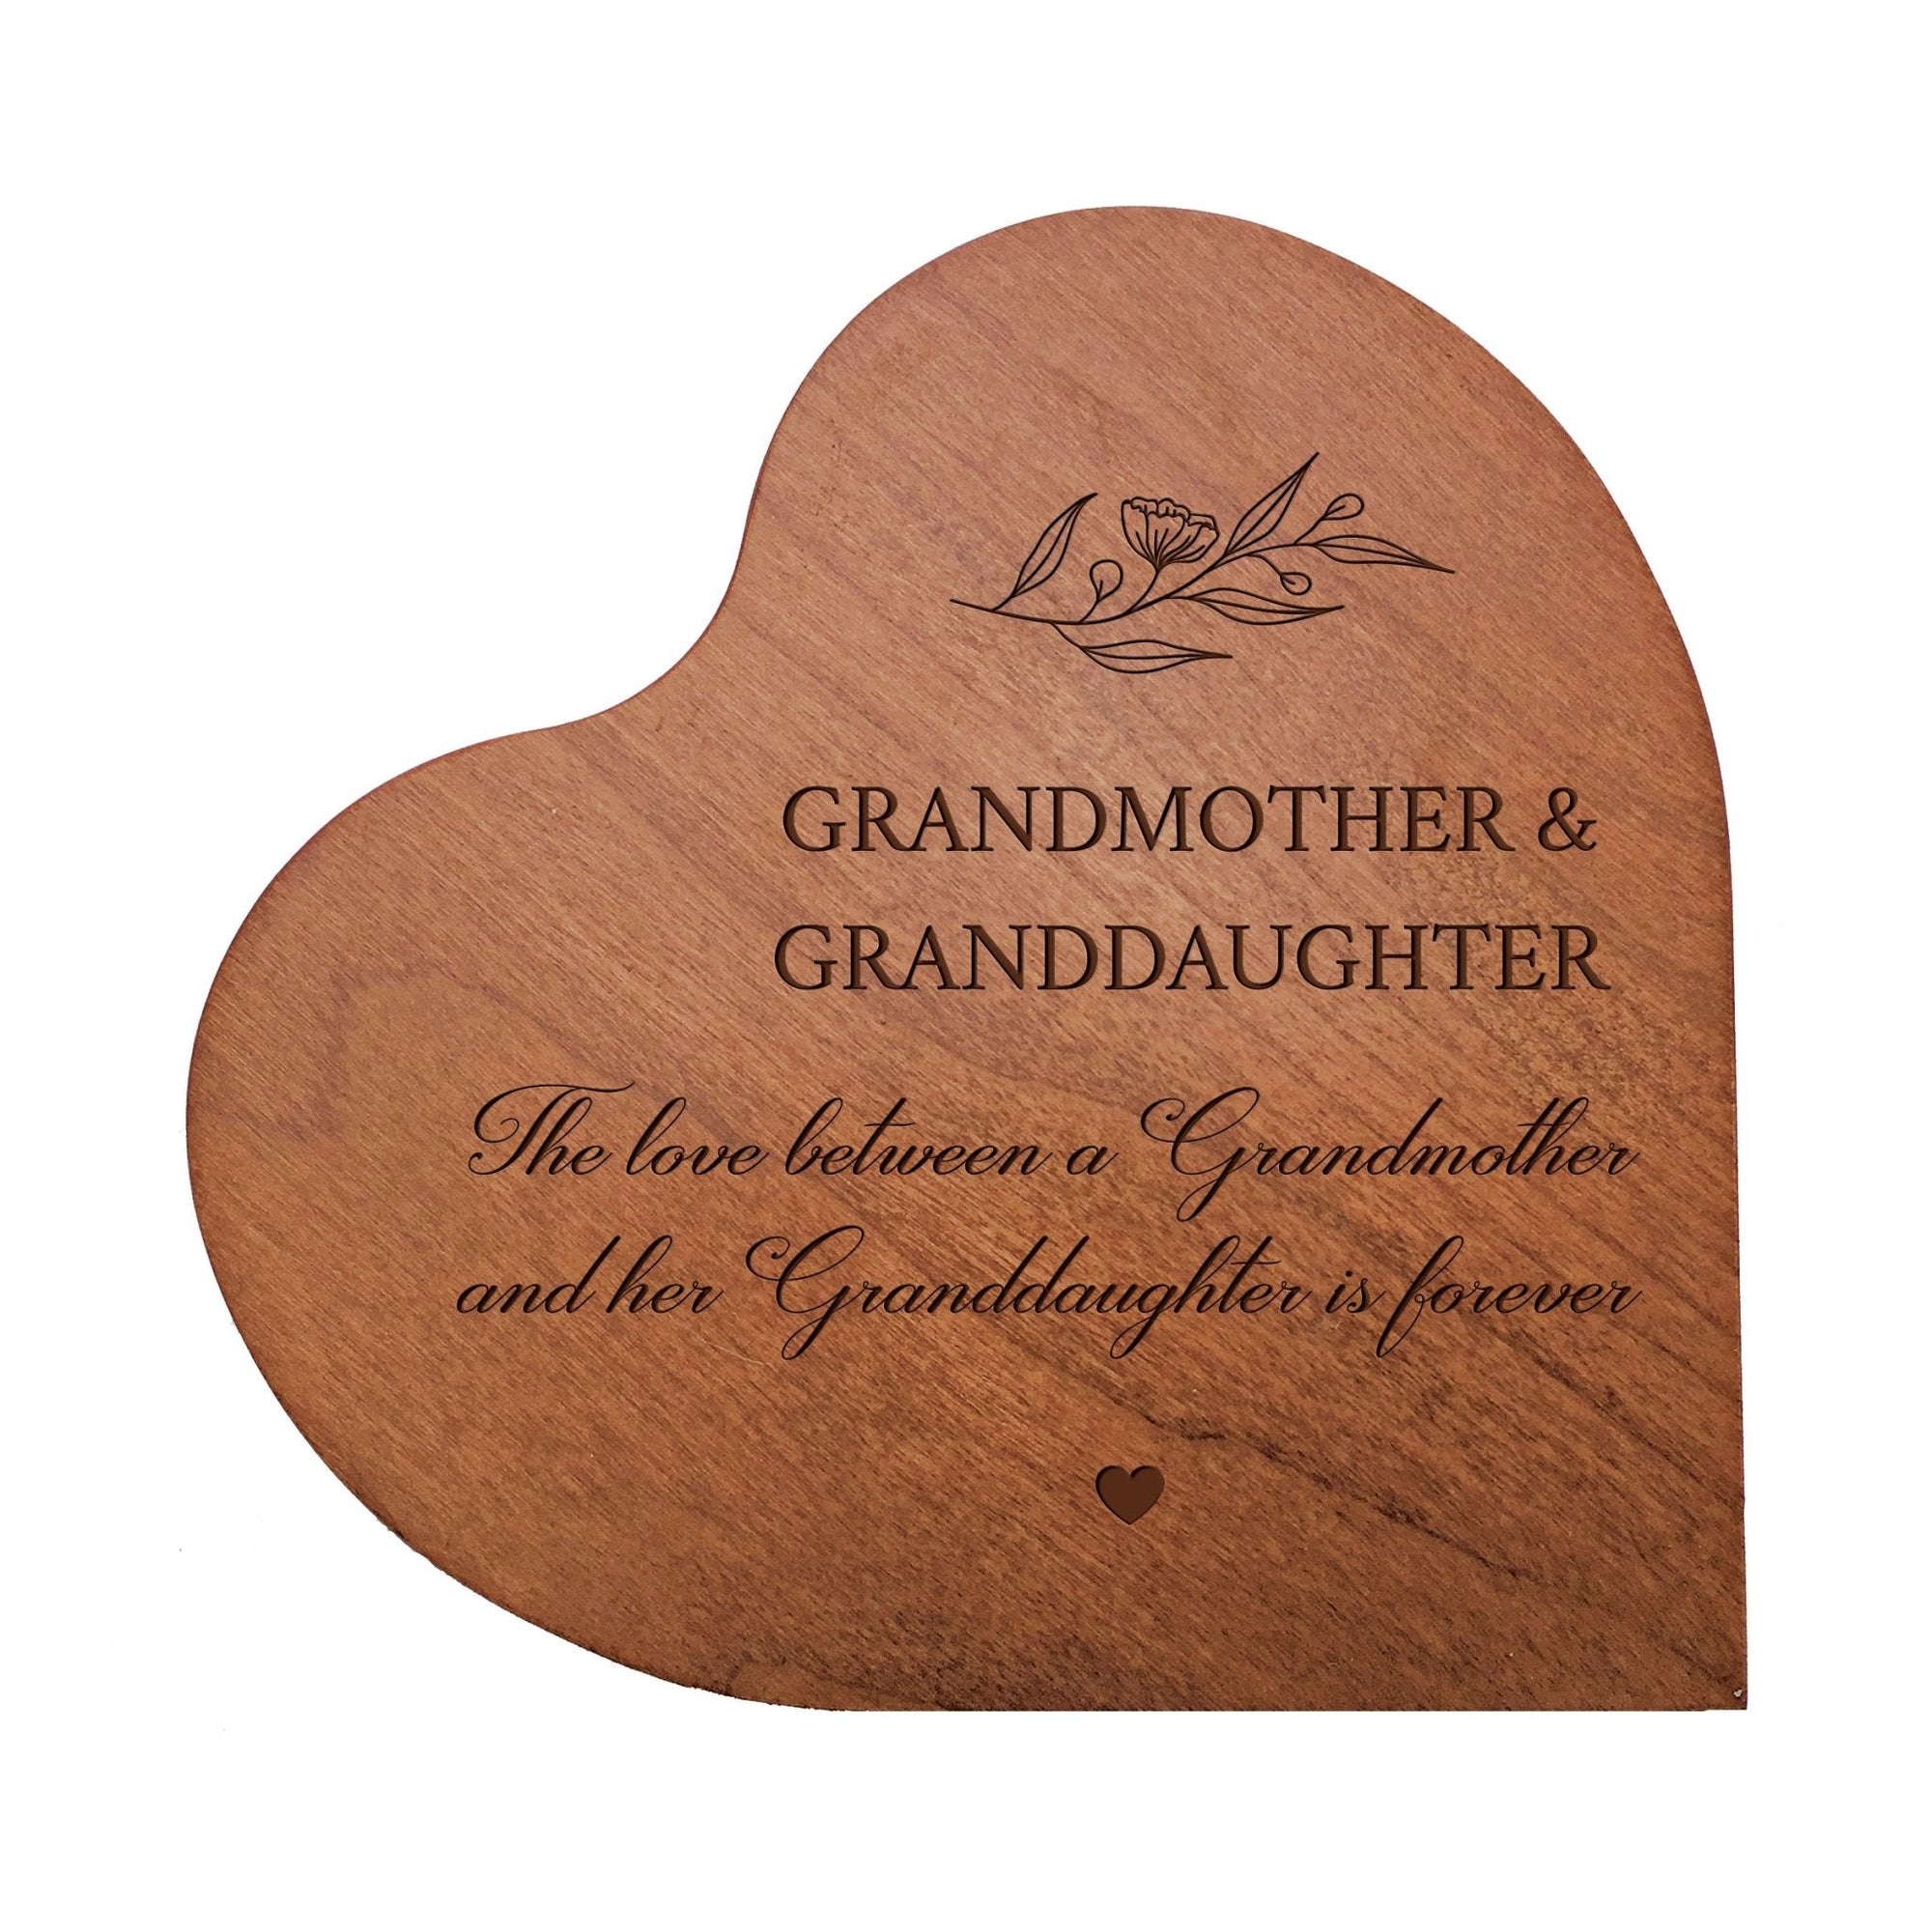 Modern Grandmother’s Love Solid Wood Heart Decoration With Inspirational Verse Keepsake Gift 5x5.25 - Grandmother & Granddaughter - LifeSong Milestones